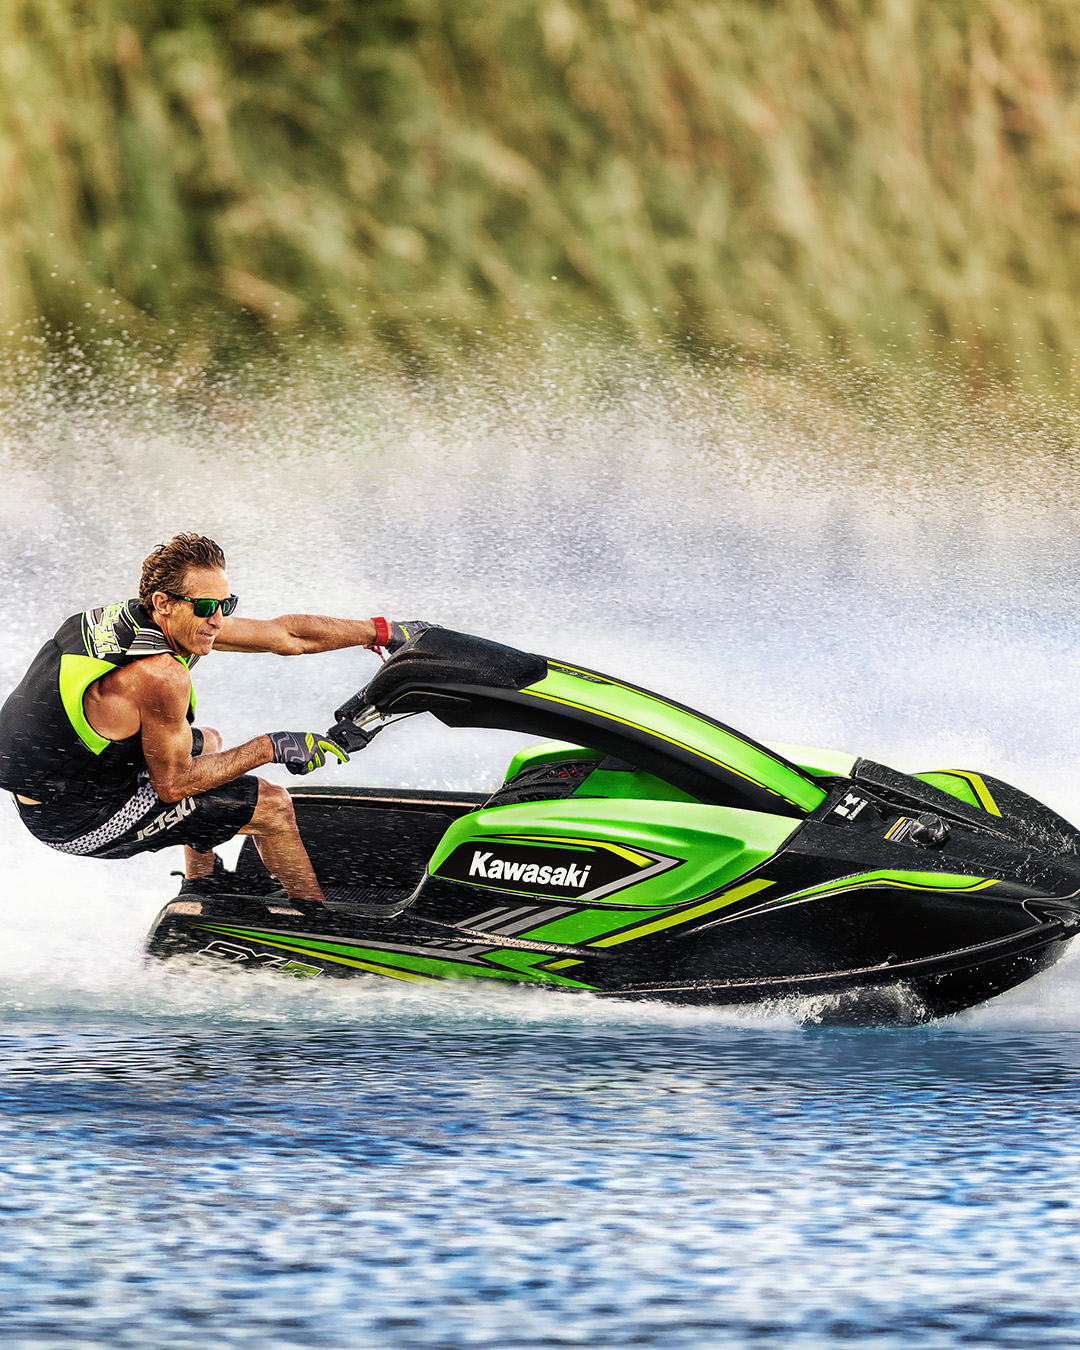 Kawasaki USA on Twitter: "From the original to the modern 2020 Jet SX-R. Which Jet Ski is your favorite from the past four decades? #IgniteTheFun #TBT https://t.co/FS9GWTvJtS" /